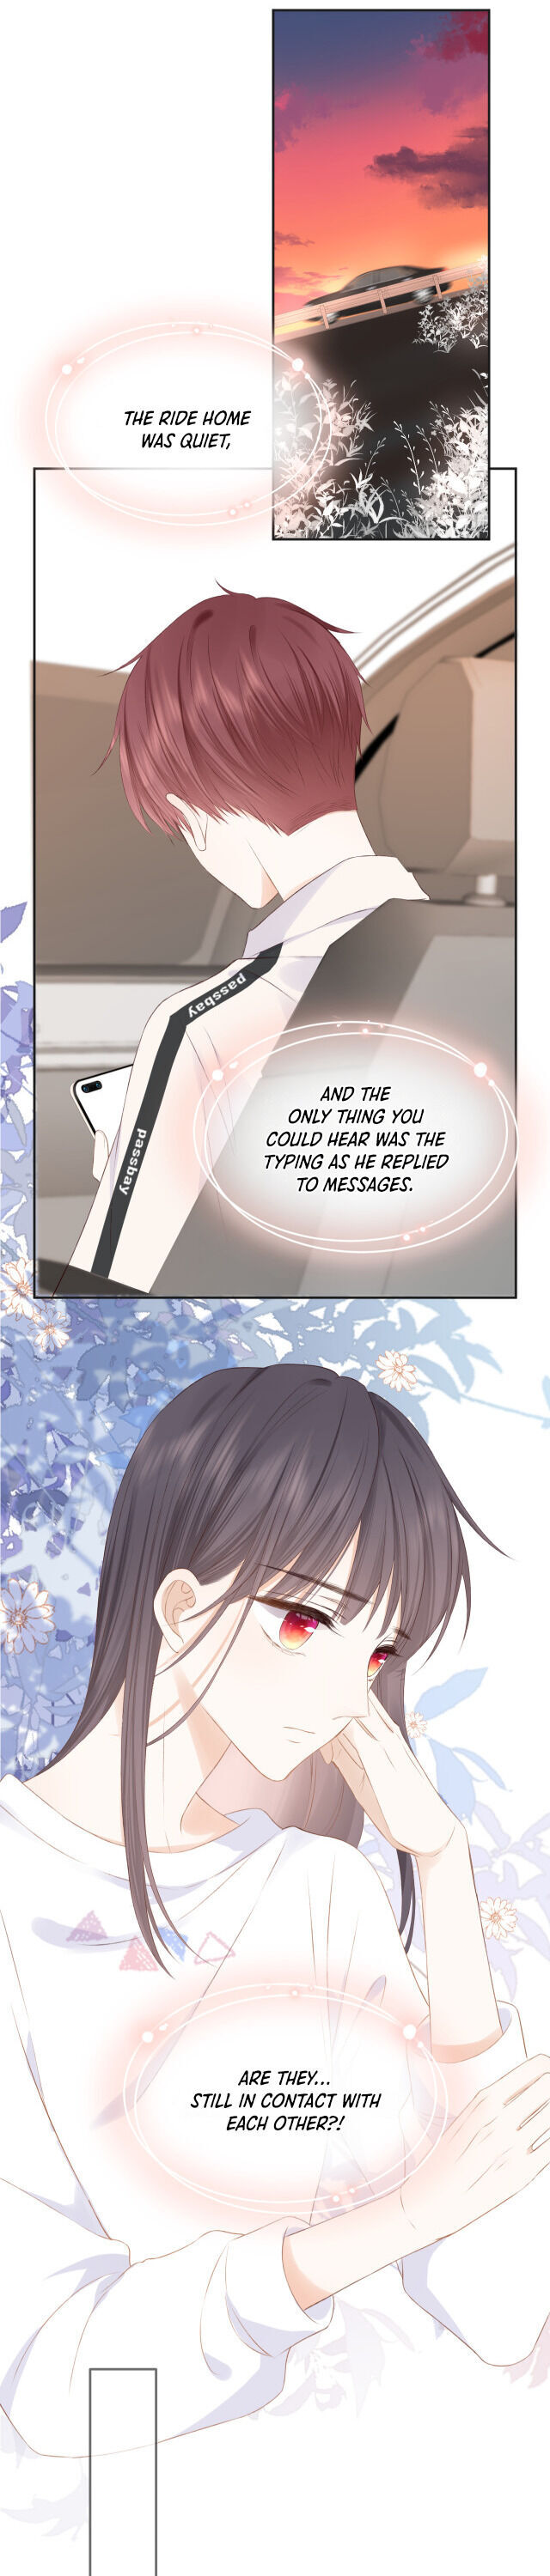 Unrequited Love Chapter 8 - Page 6